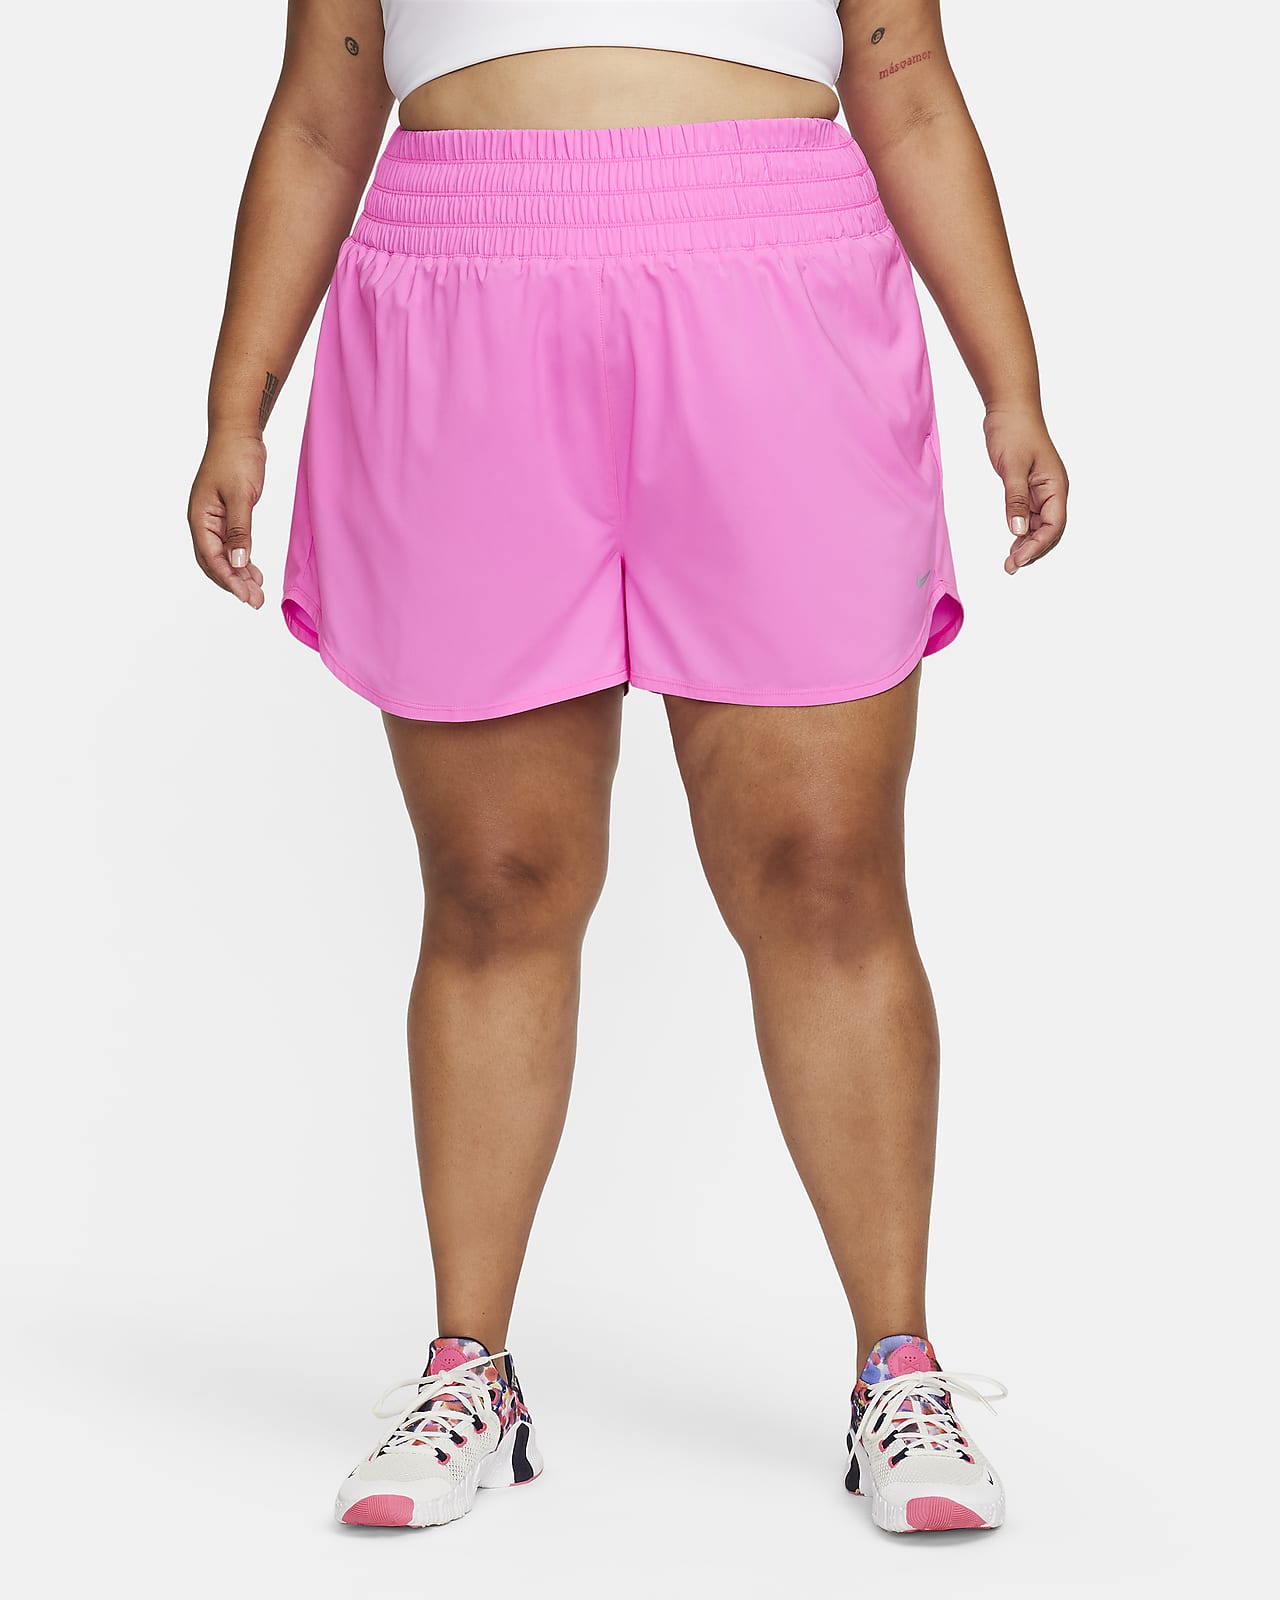 Nike Dri-FIT One Women's Ultra High-Waisted 3" Brief-Lined Shorts (Plus Size)